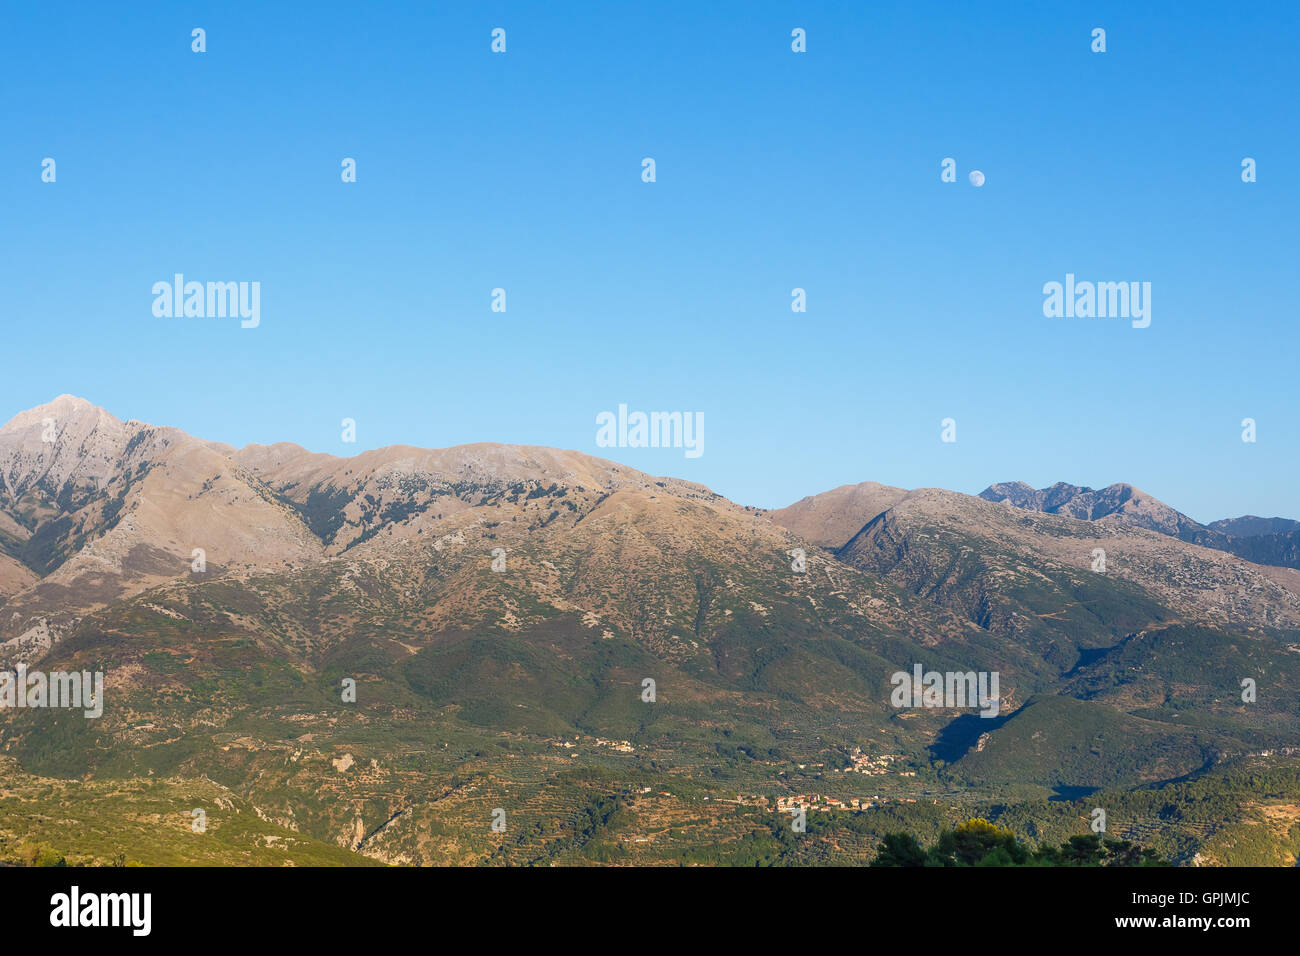 The emblematic Taygetus Mountain with the moon rising over its peaks early in the afternoon in Messenia, Greece Stock Photo